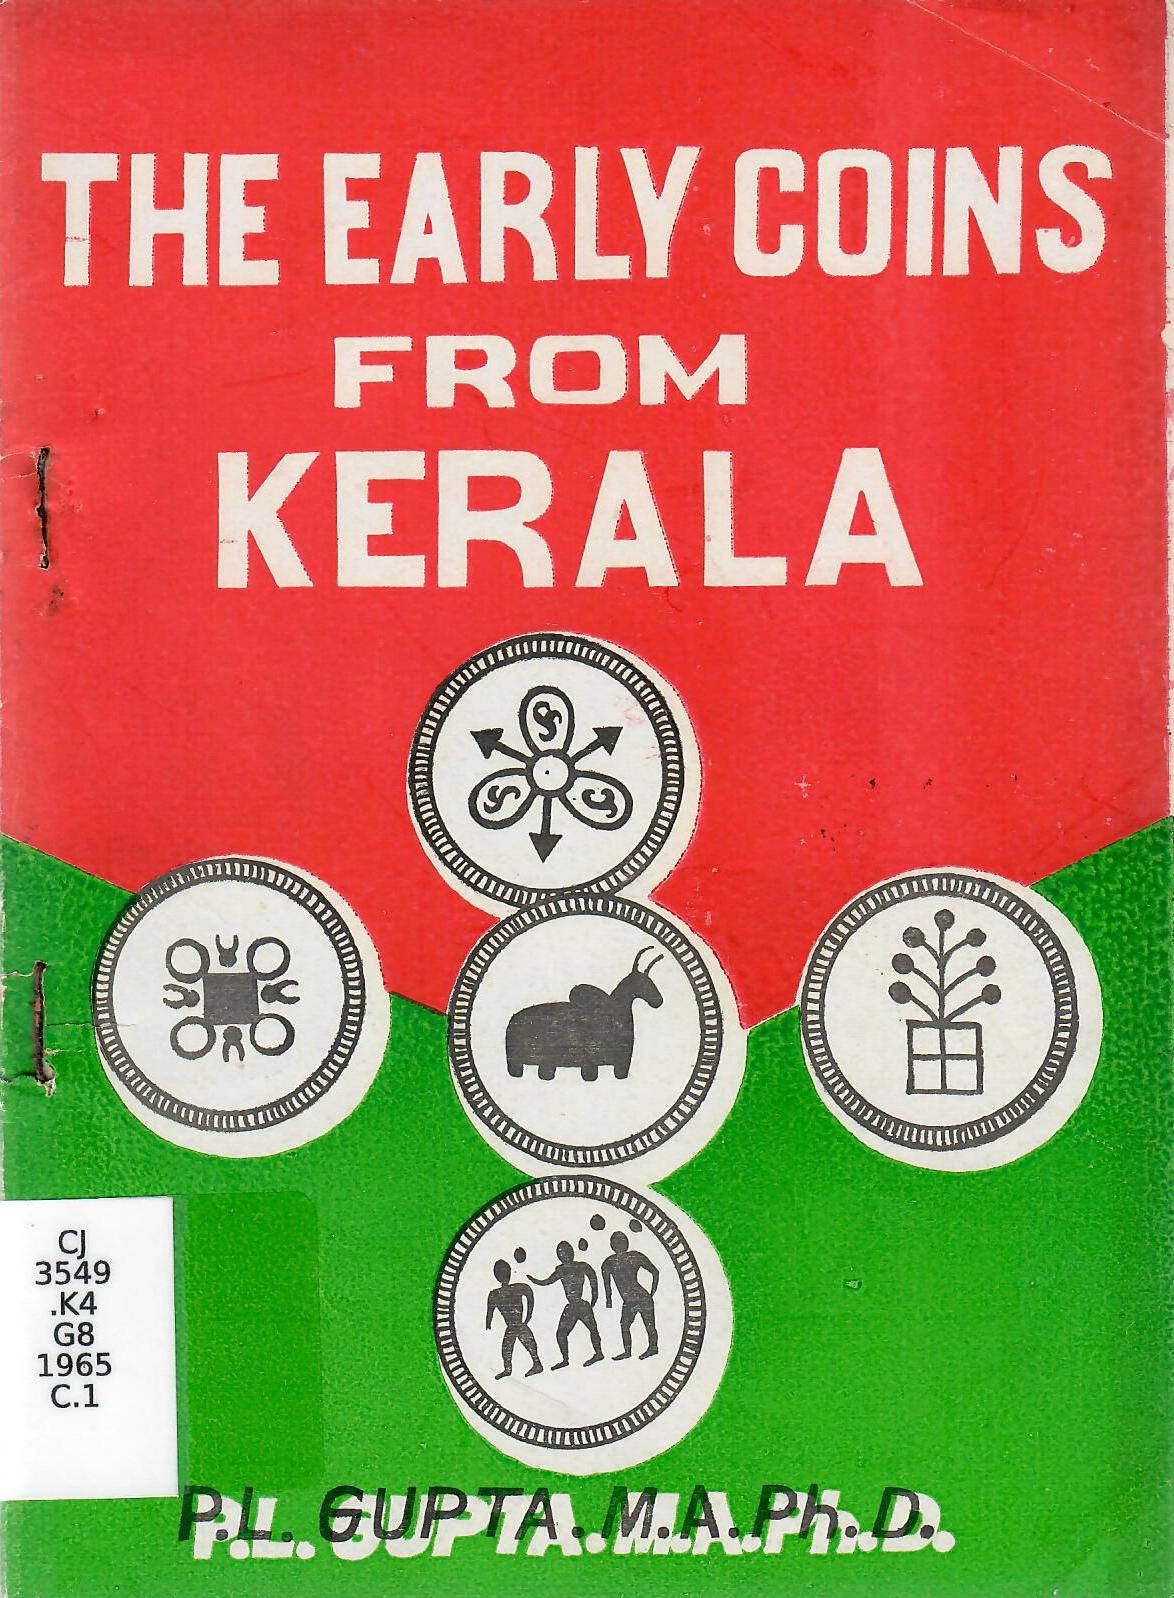 THE EARLY COINS FROM KERALA